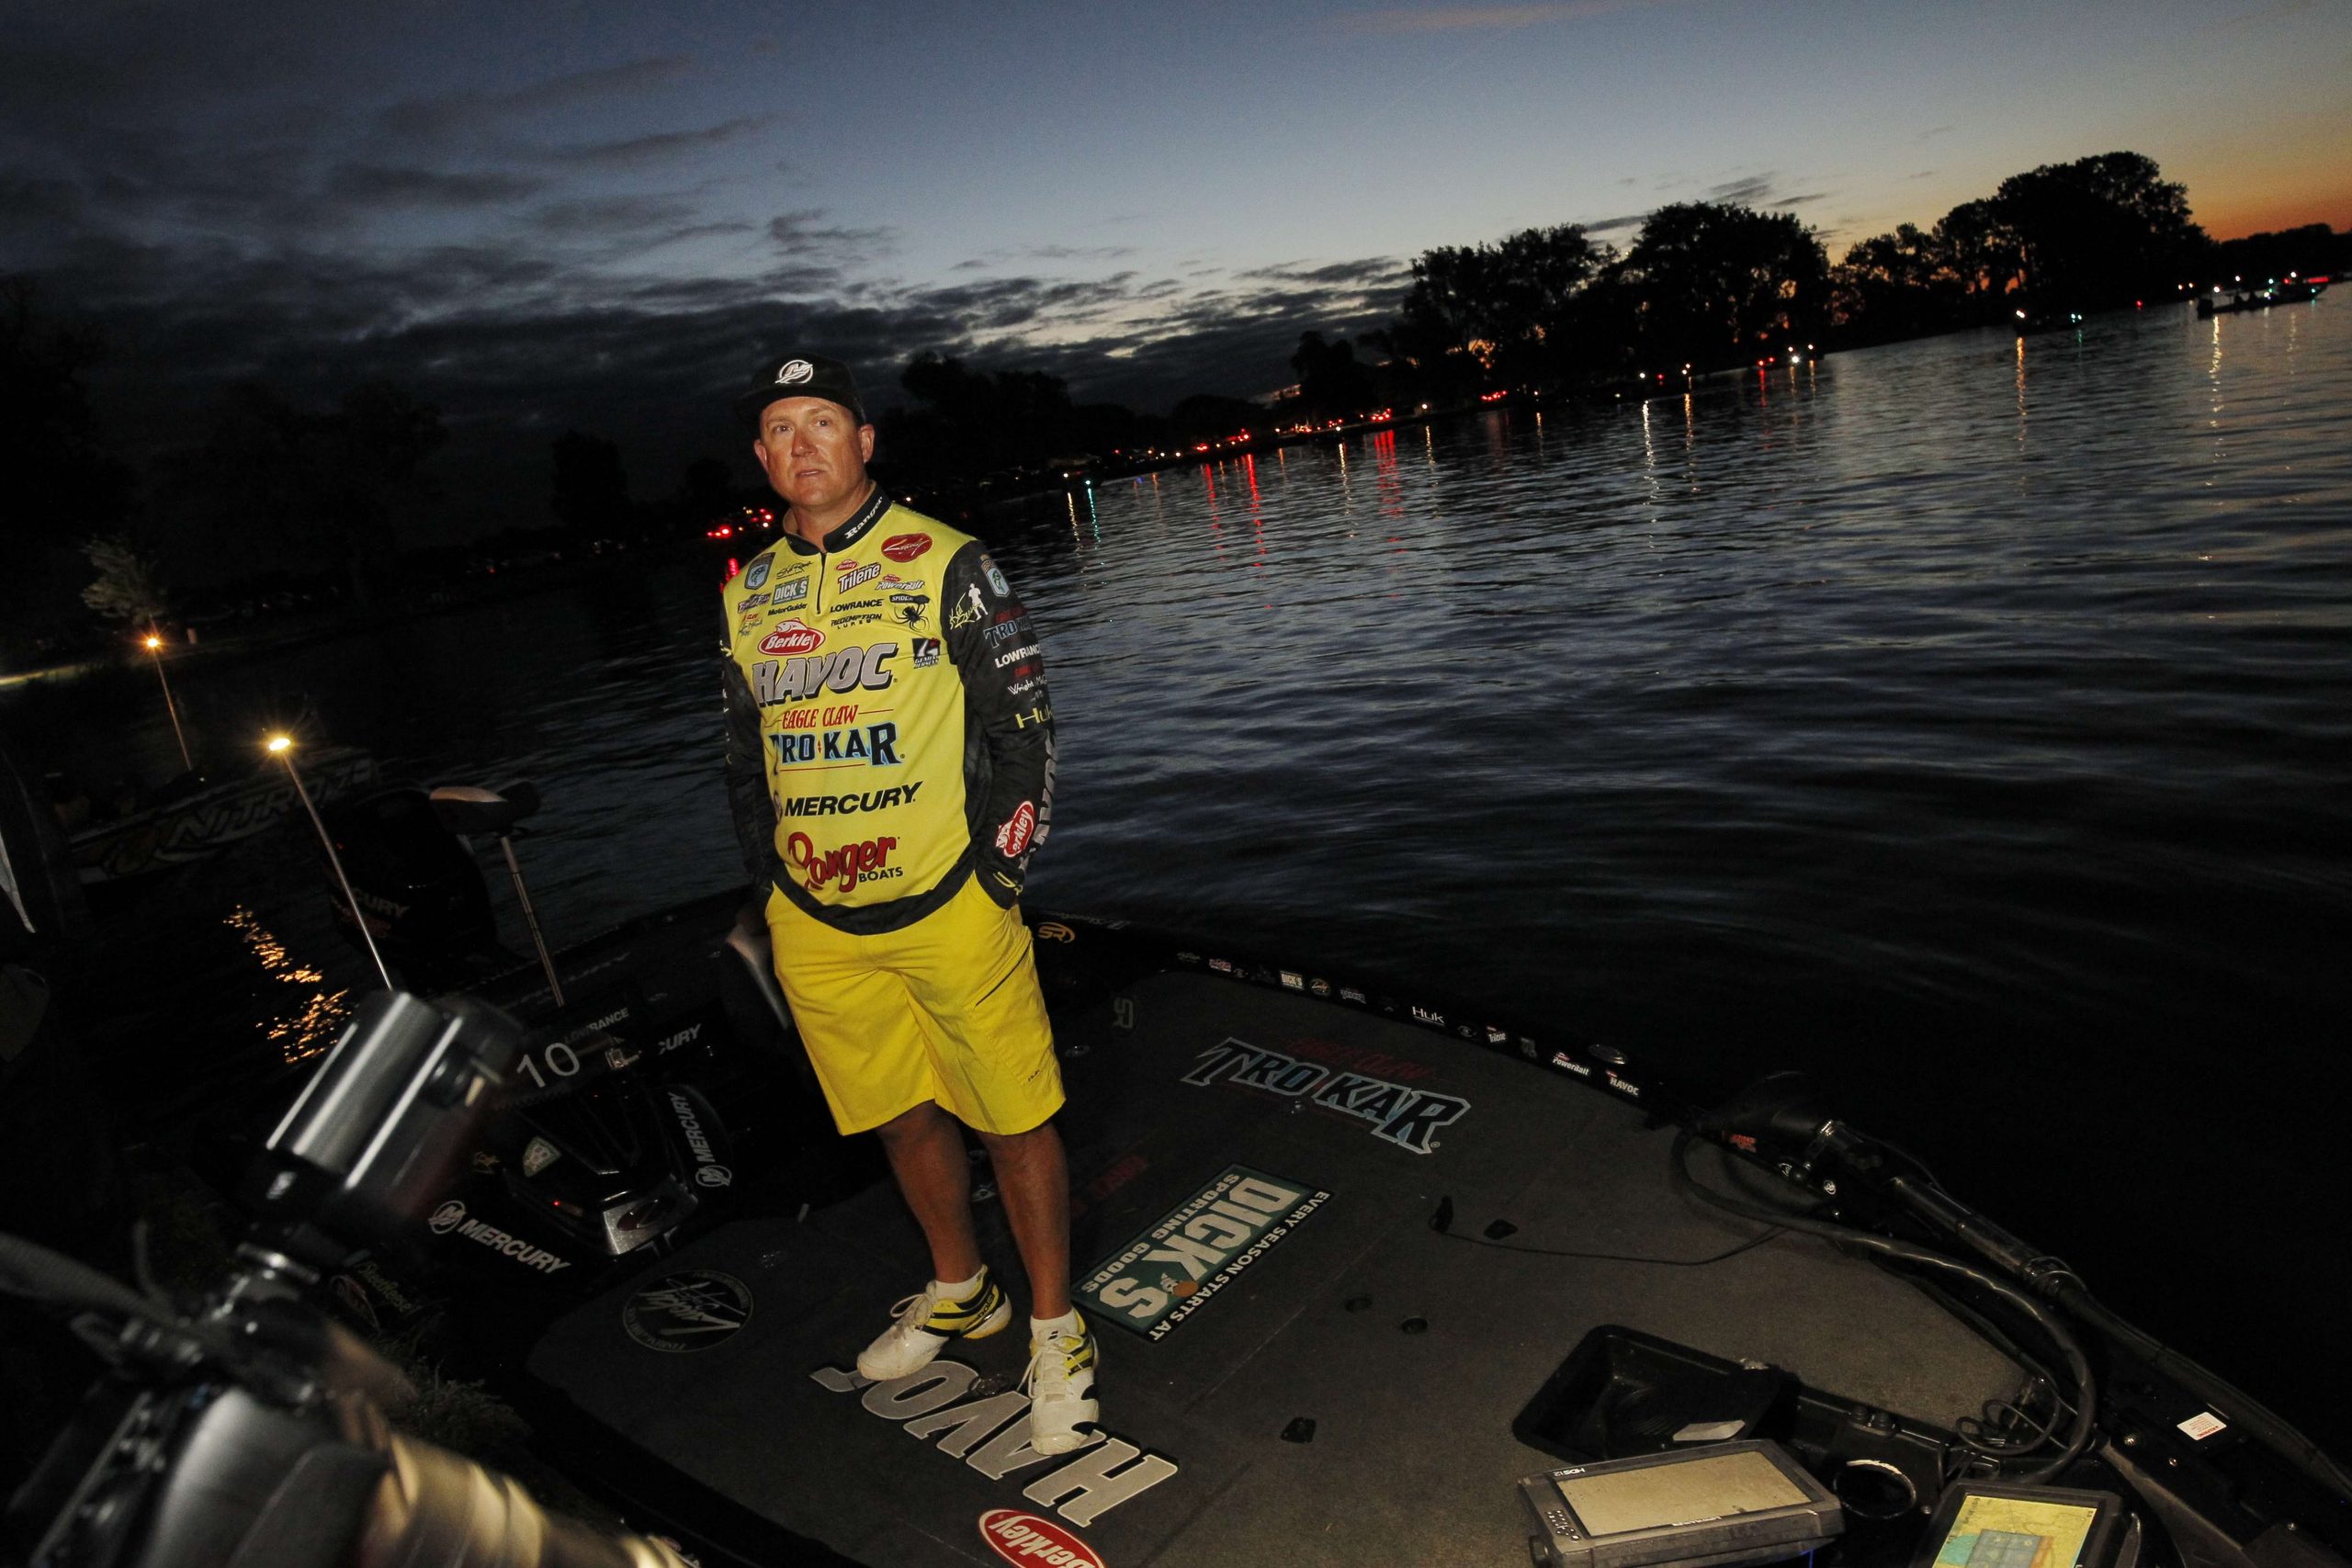 Skeet Reese looks to be set for a day of smallie fishing.